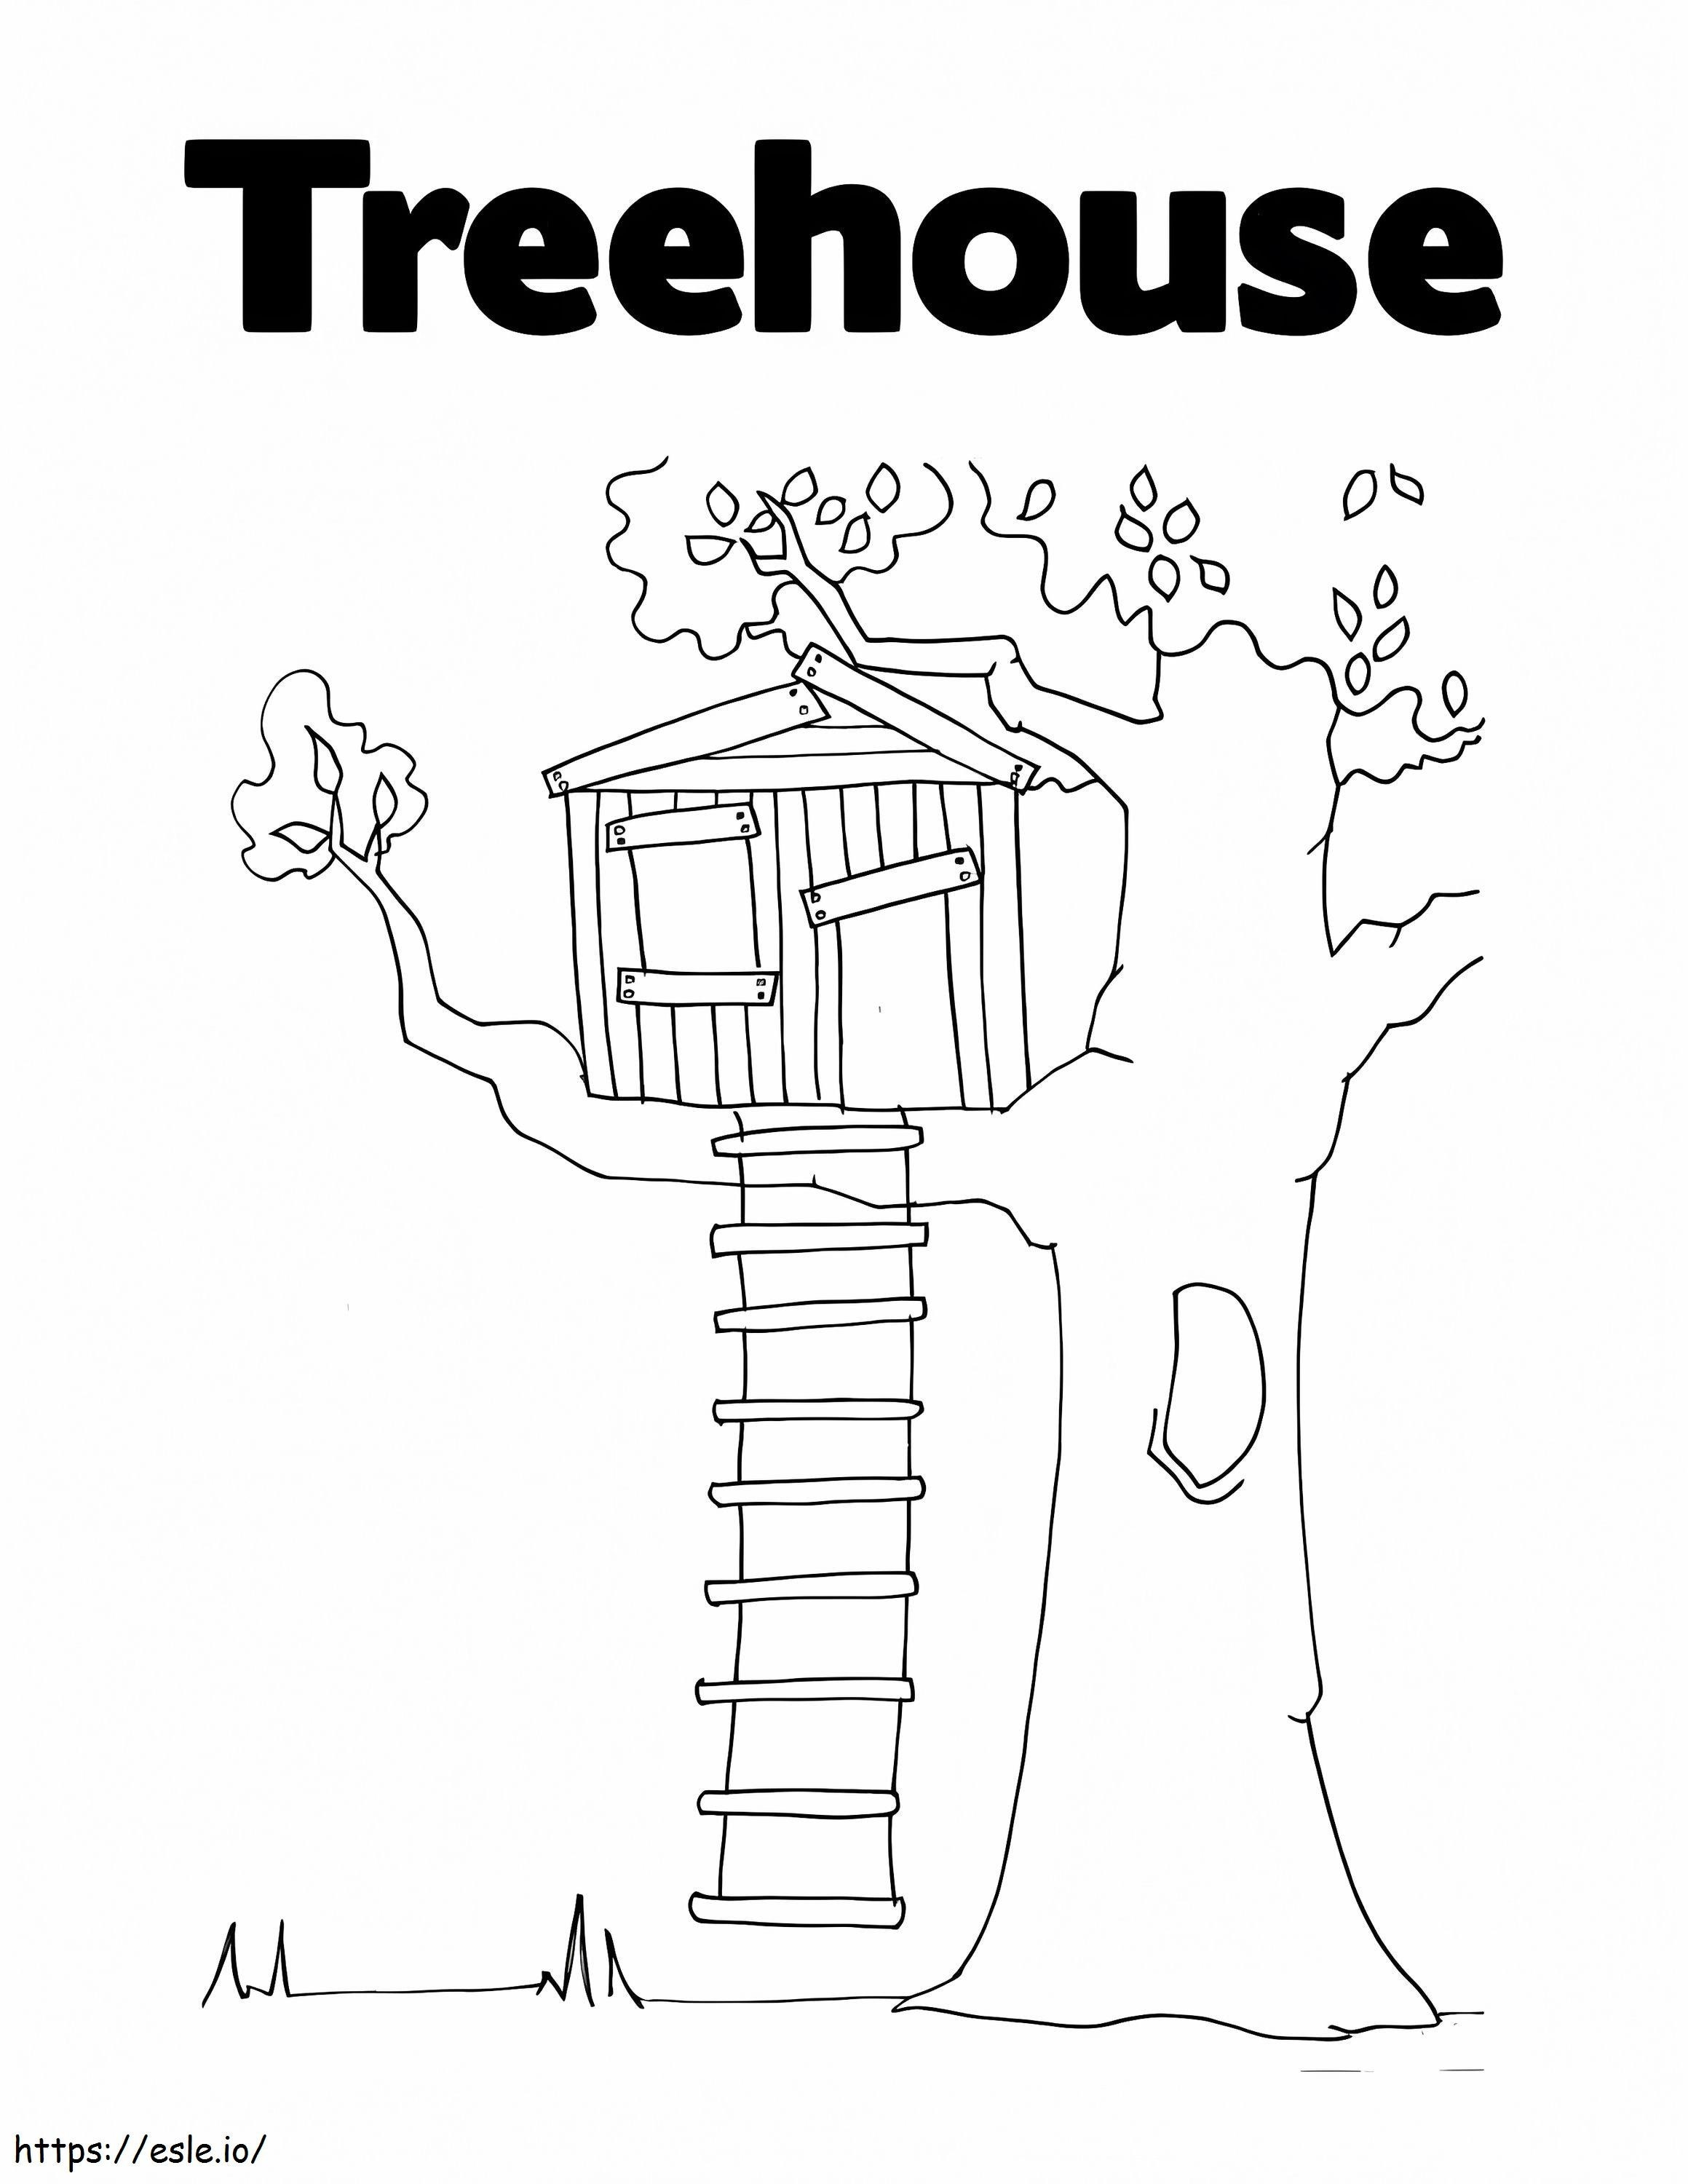 Treehouse 1 coloring page